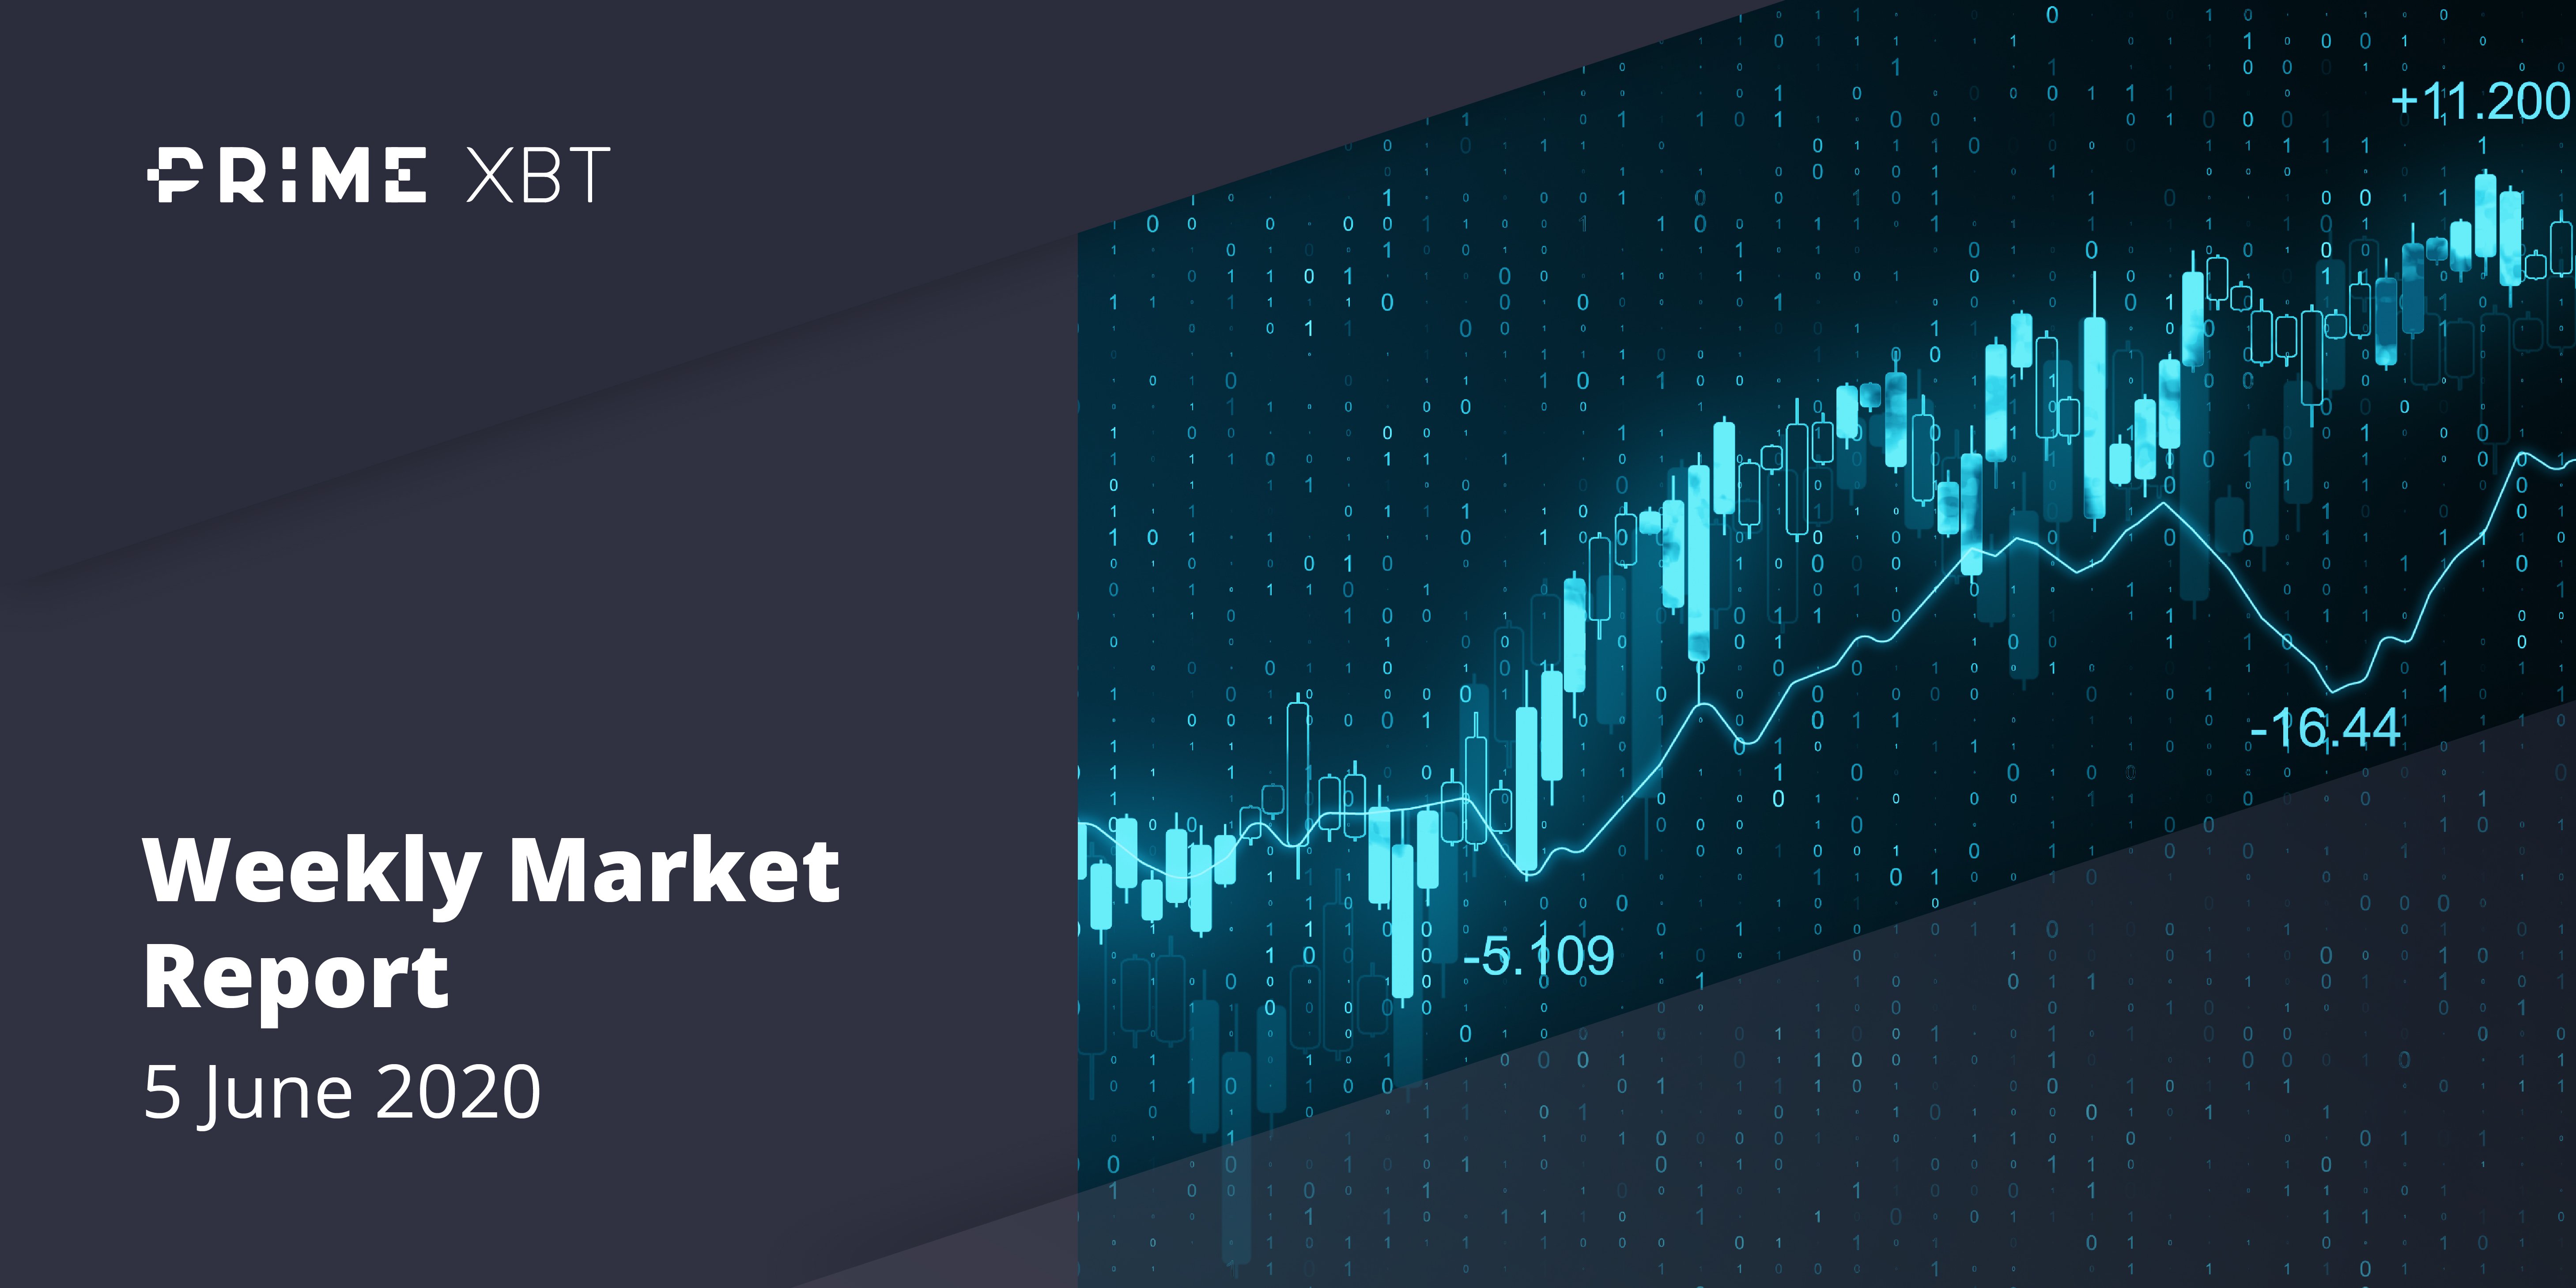 Crypto Market Report Ethereum Stars While Bitcoin Posts Gains, High Leverage and Low Liquidity